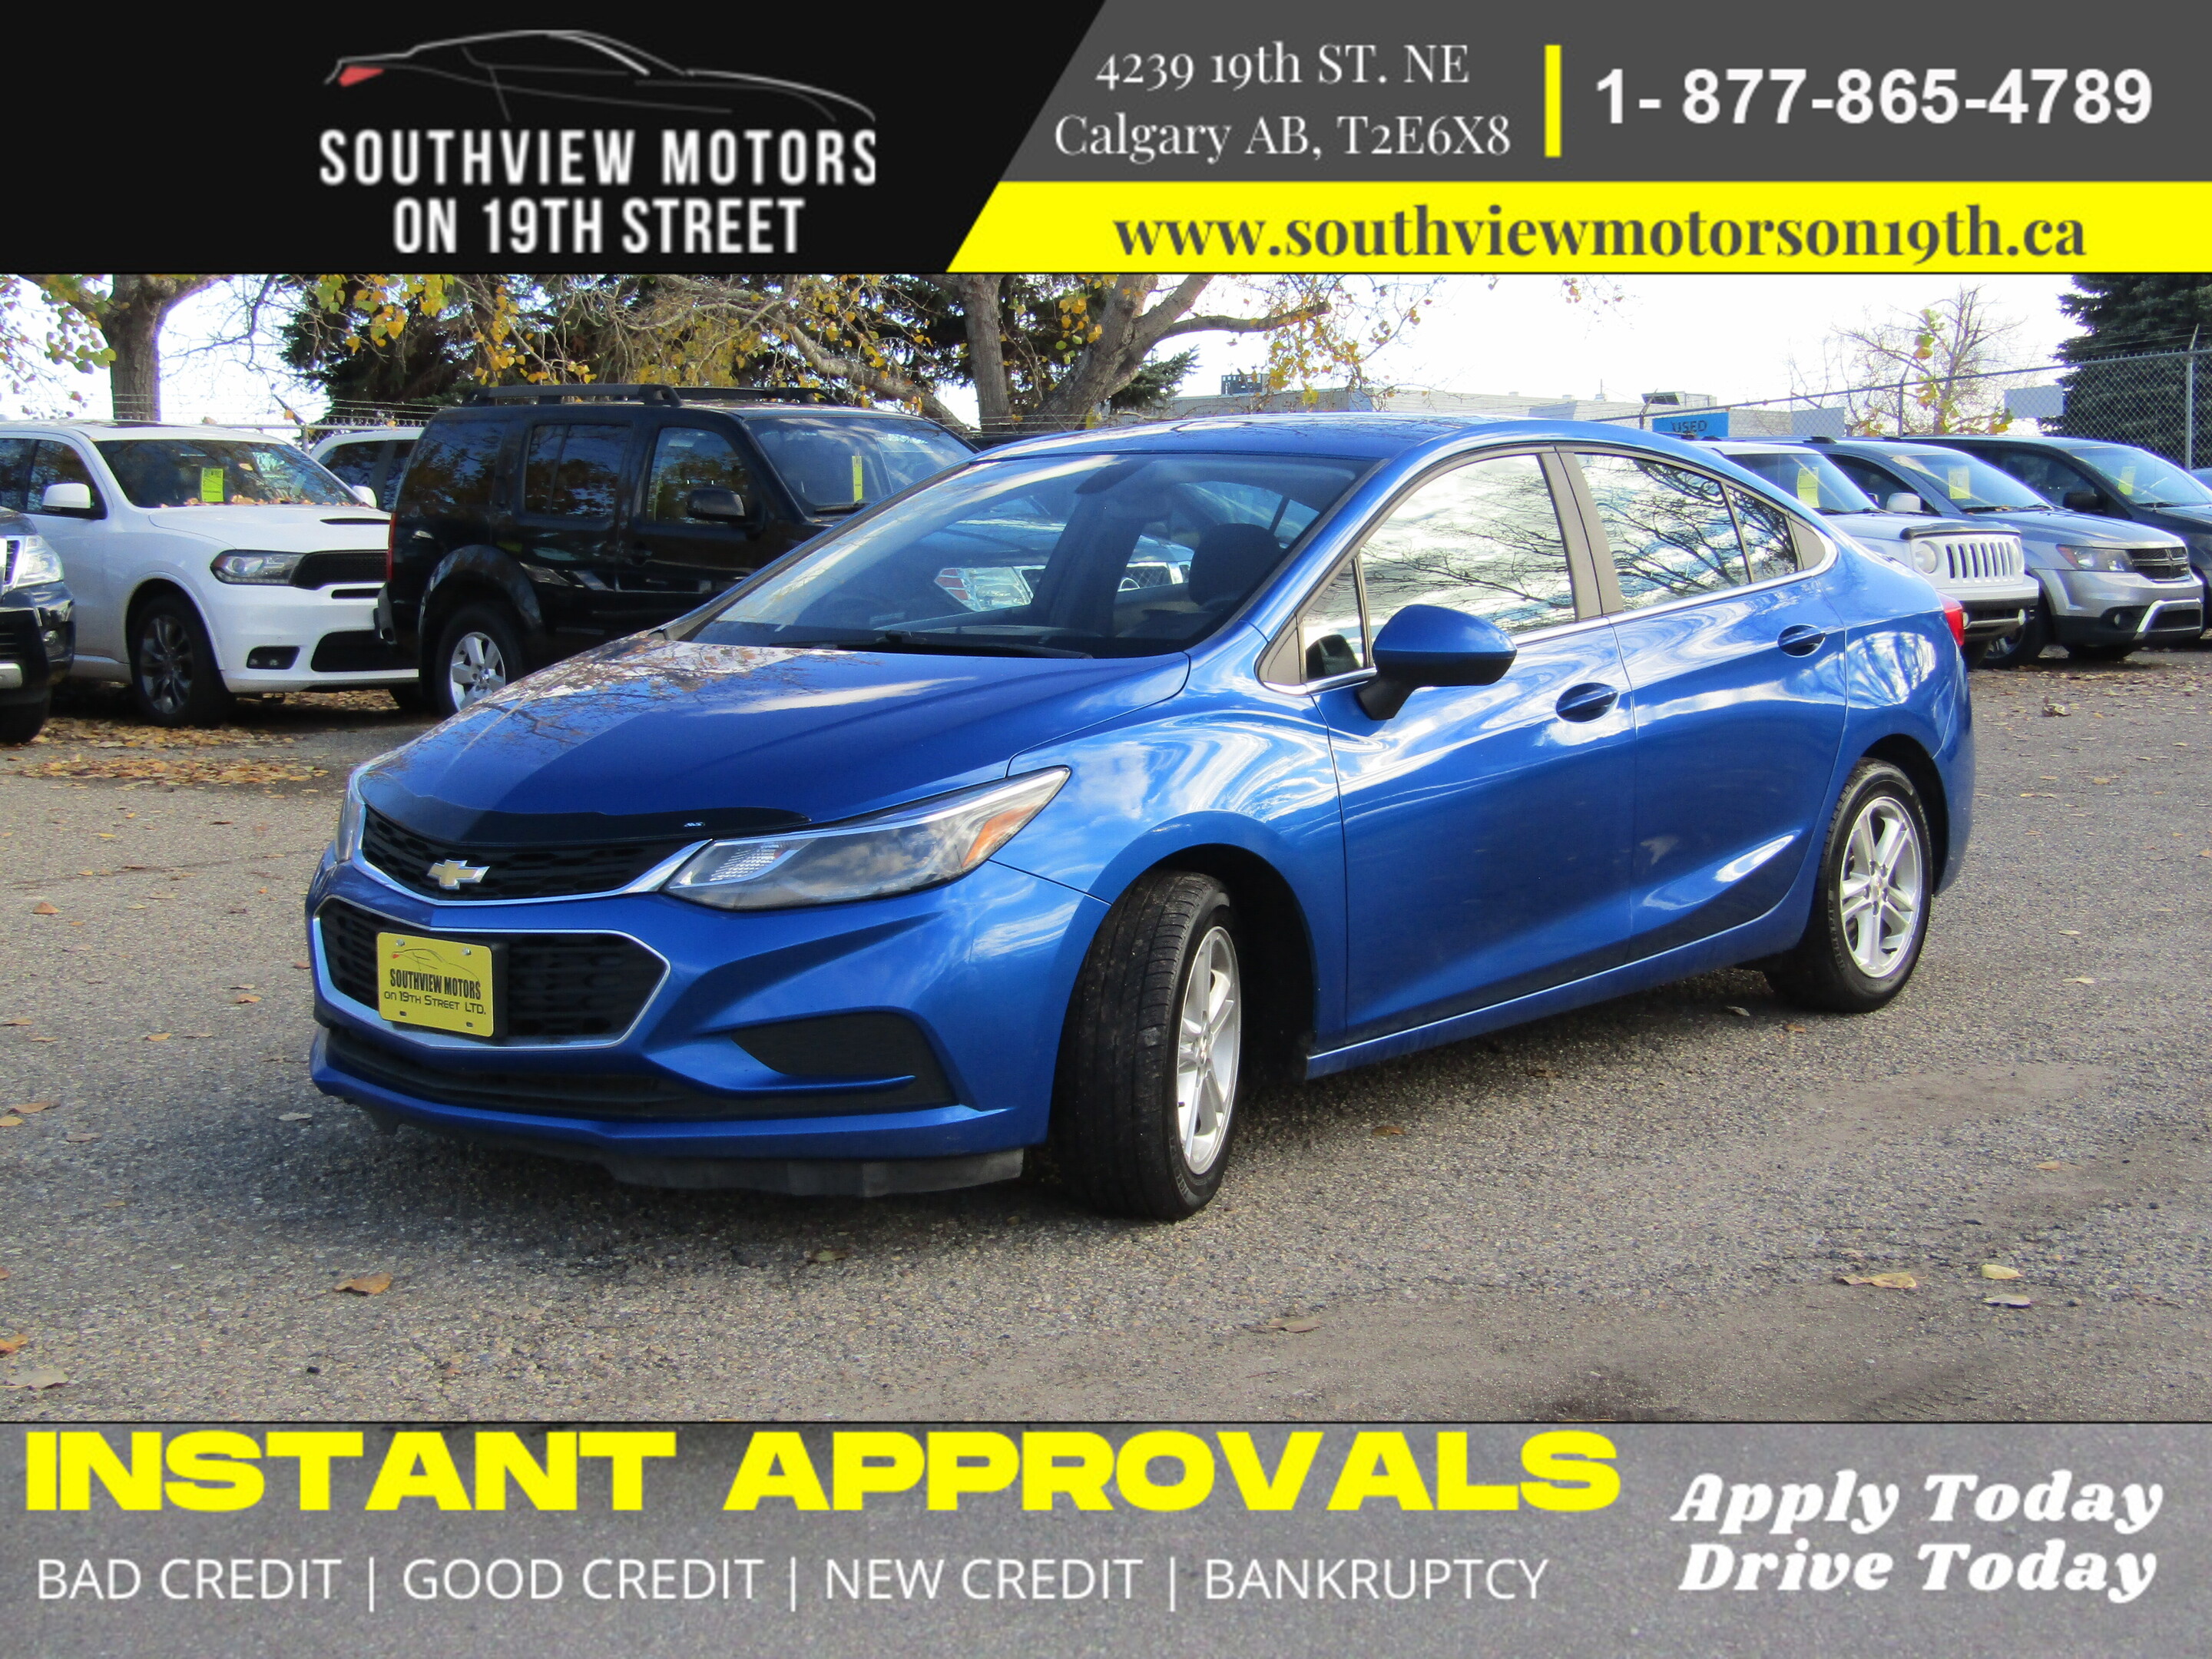 2017 Chevrolet Cruze LT-SUNROOF *FINANCING AVAILABLE*